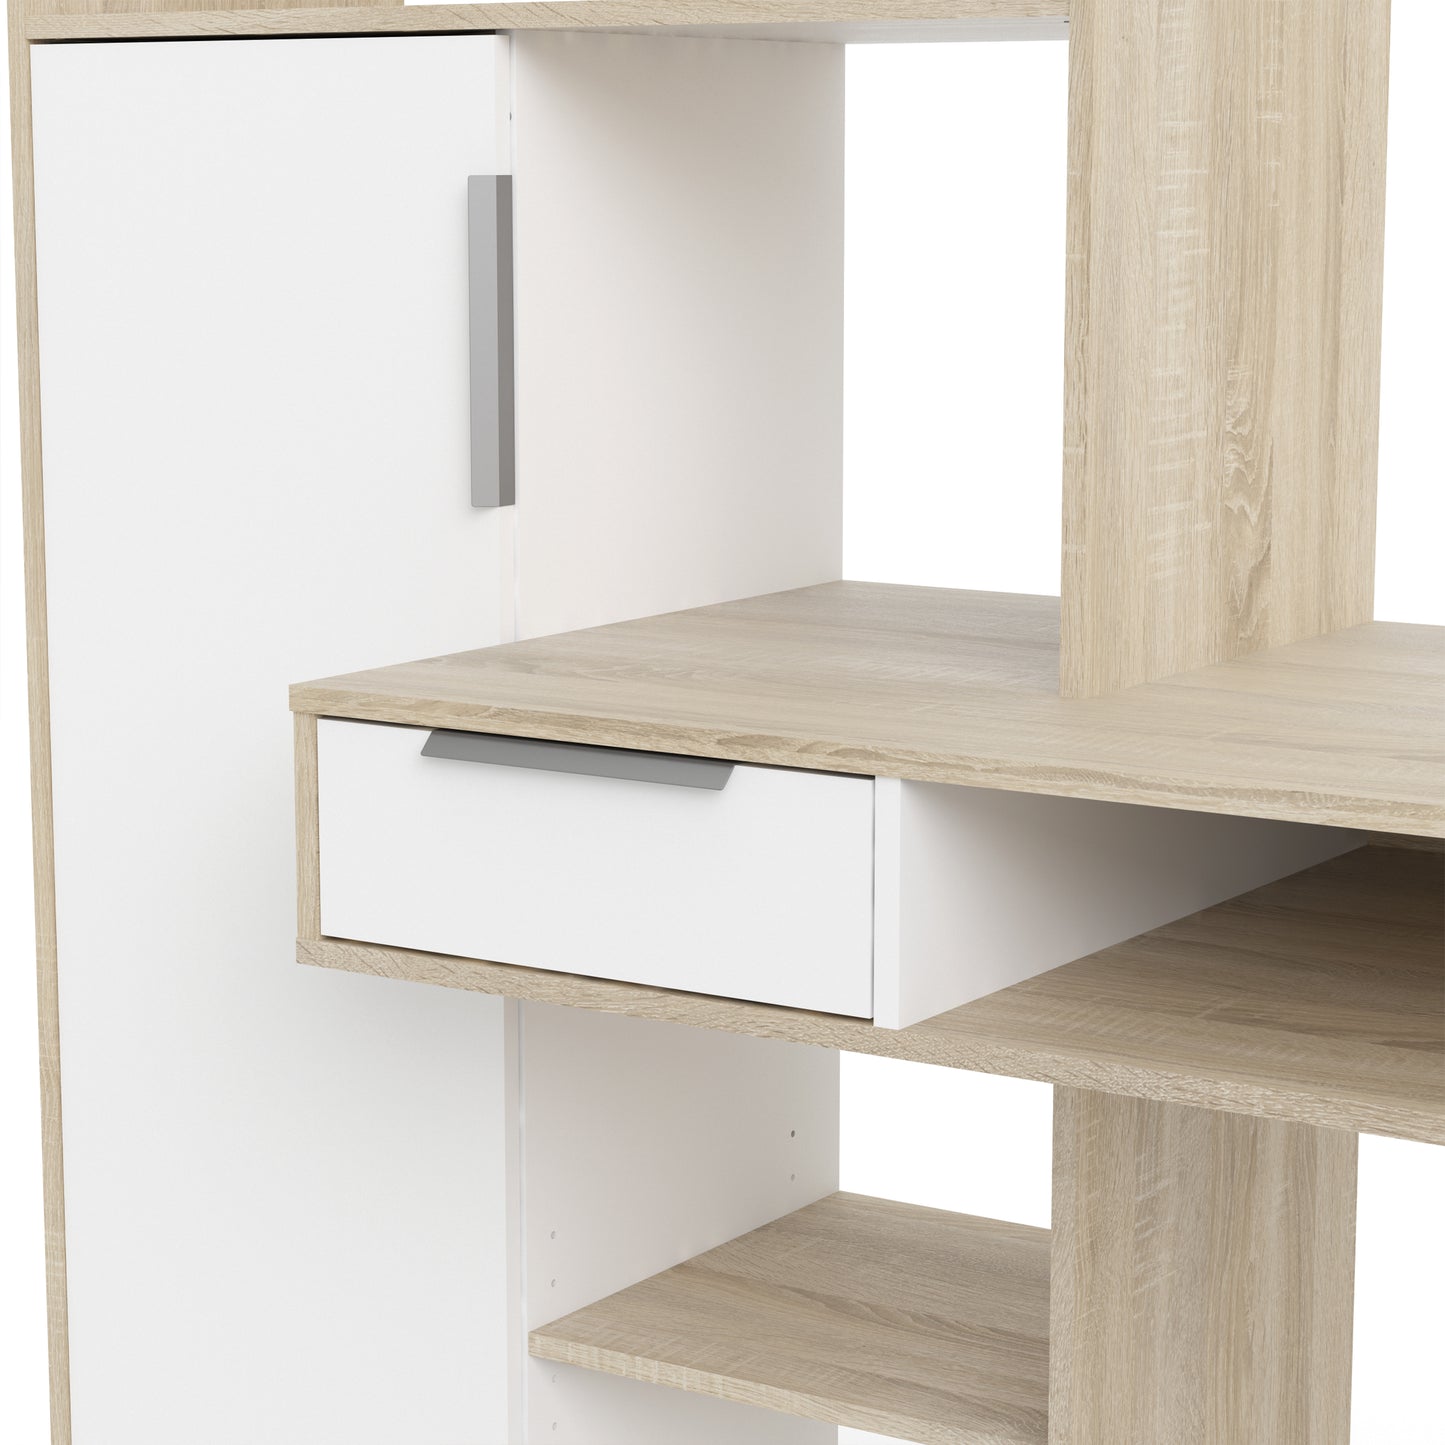 Function Plus  Desk multi-functional Desk with Drawer and 1 Door in White and Oak